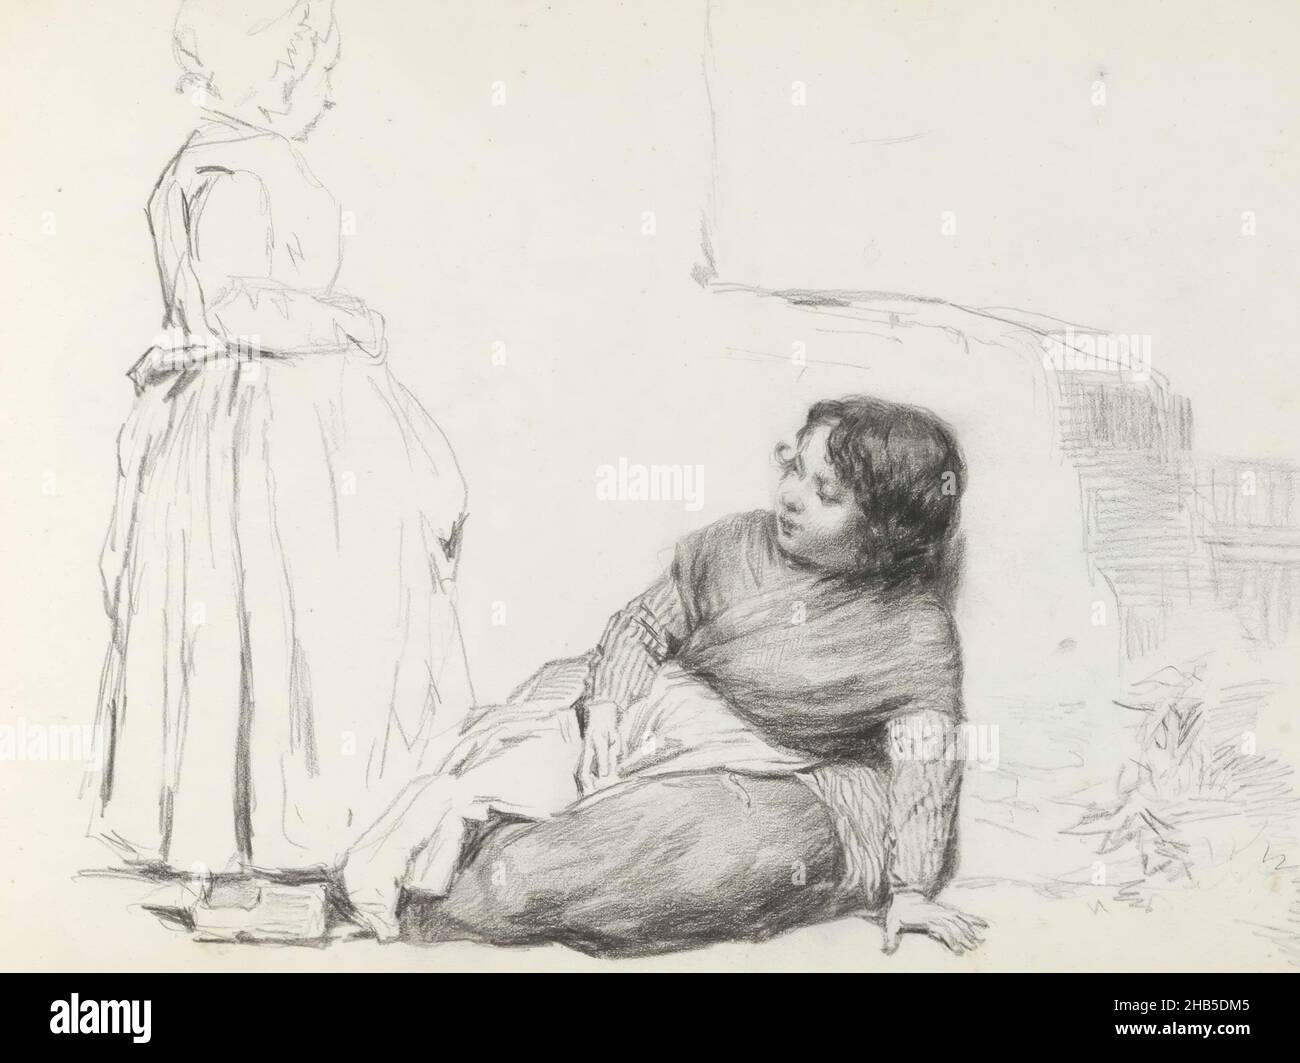 Sheet 34 verso from a sketchbook with 45 sheets, Girl sitting against a wall and a standing woman on clogs, Reinier Craeyvanger, 1822 - 1880 Stock Photo